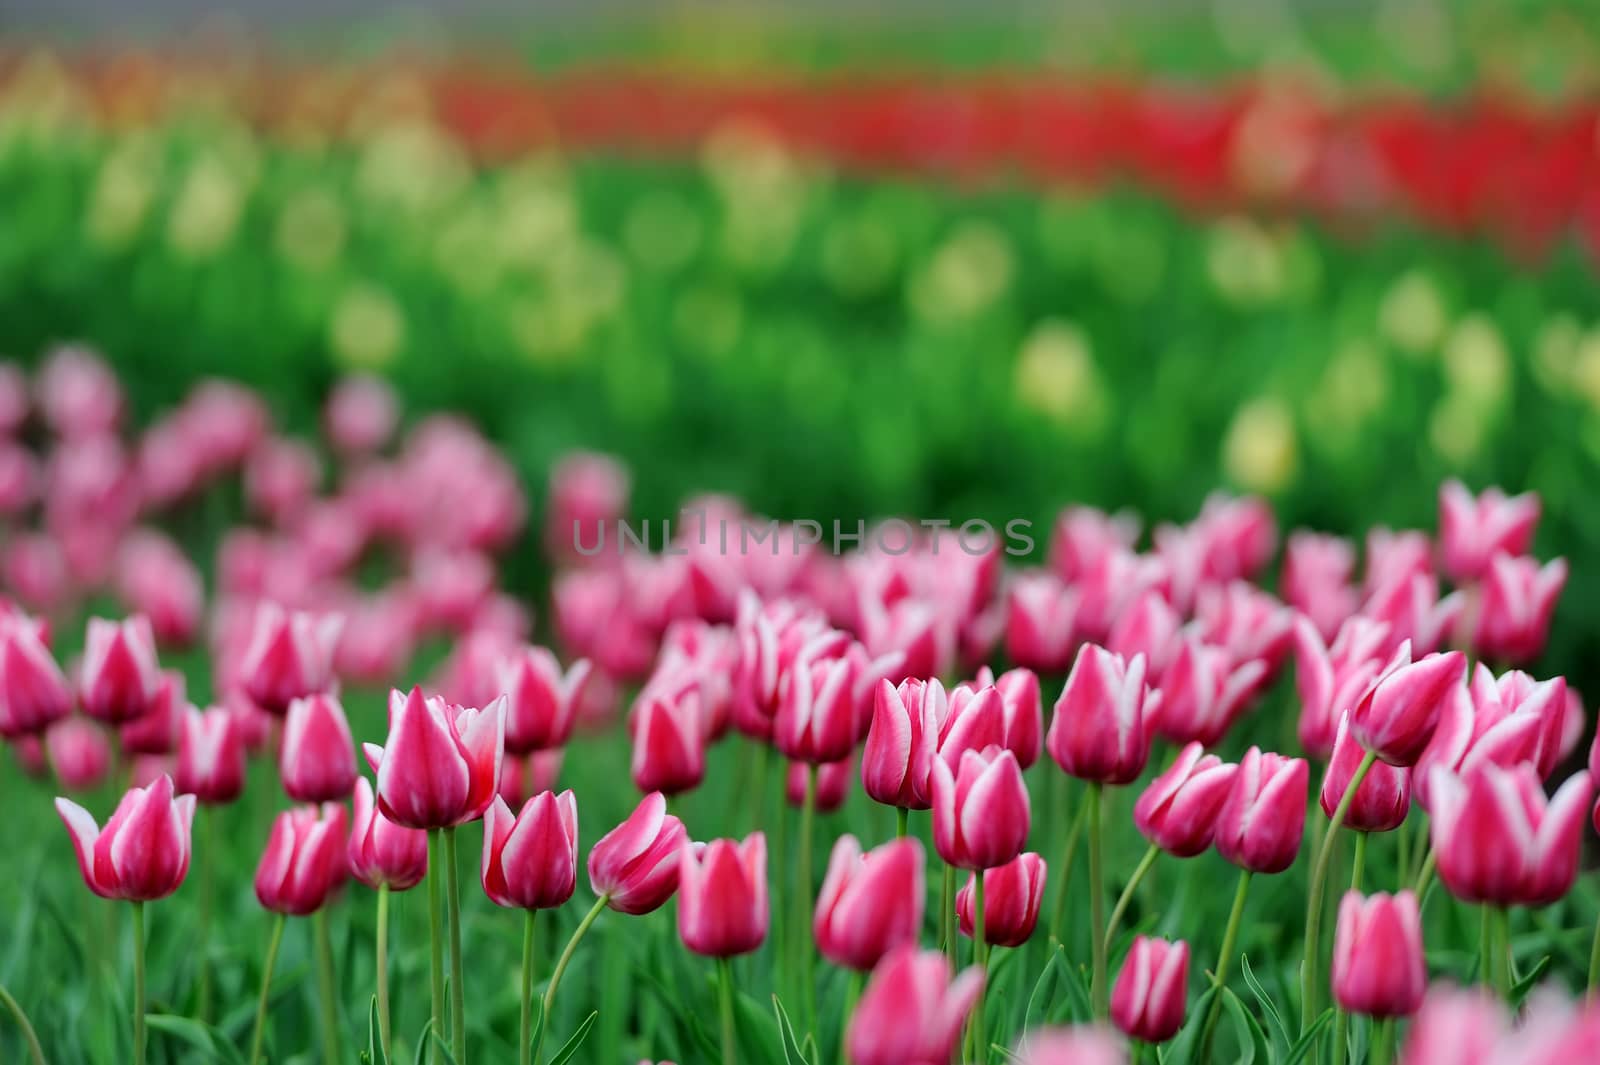 Close-up beautiful pink tulips in spring field